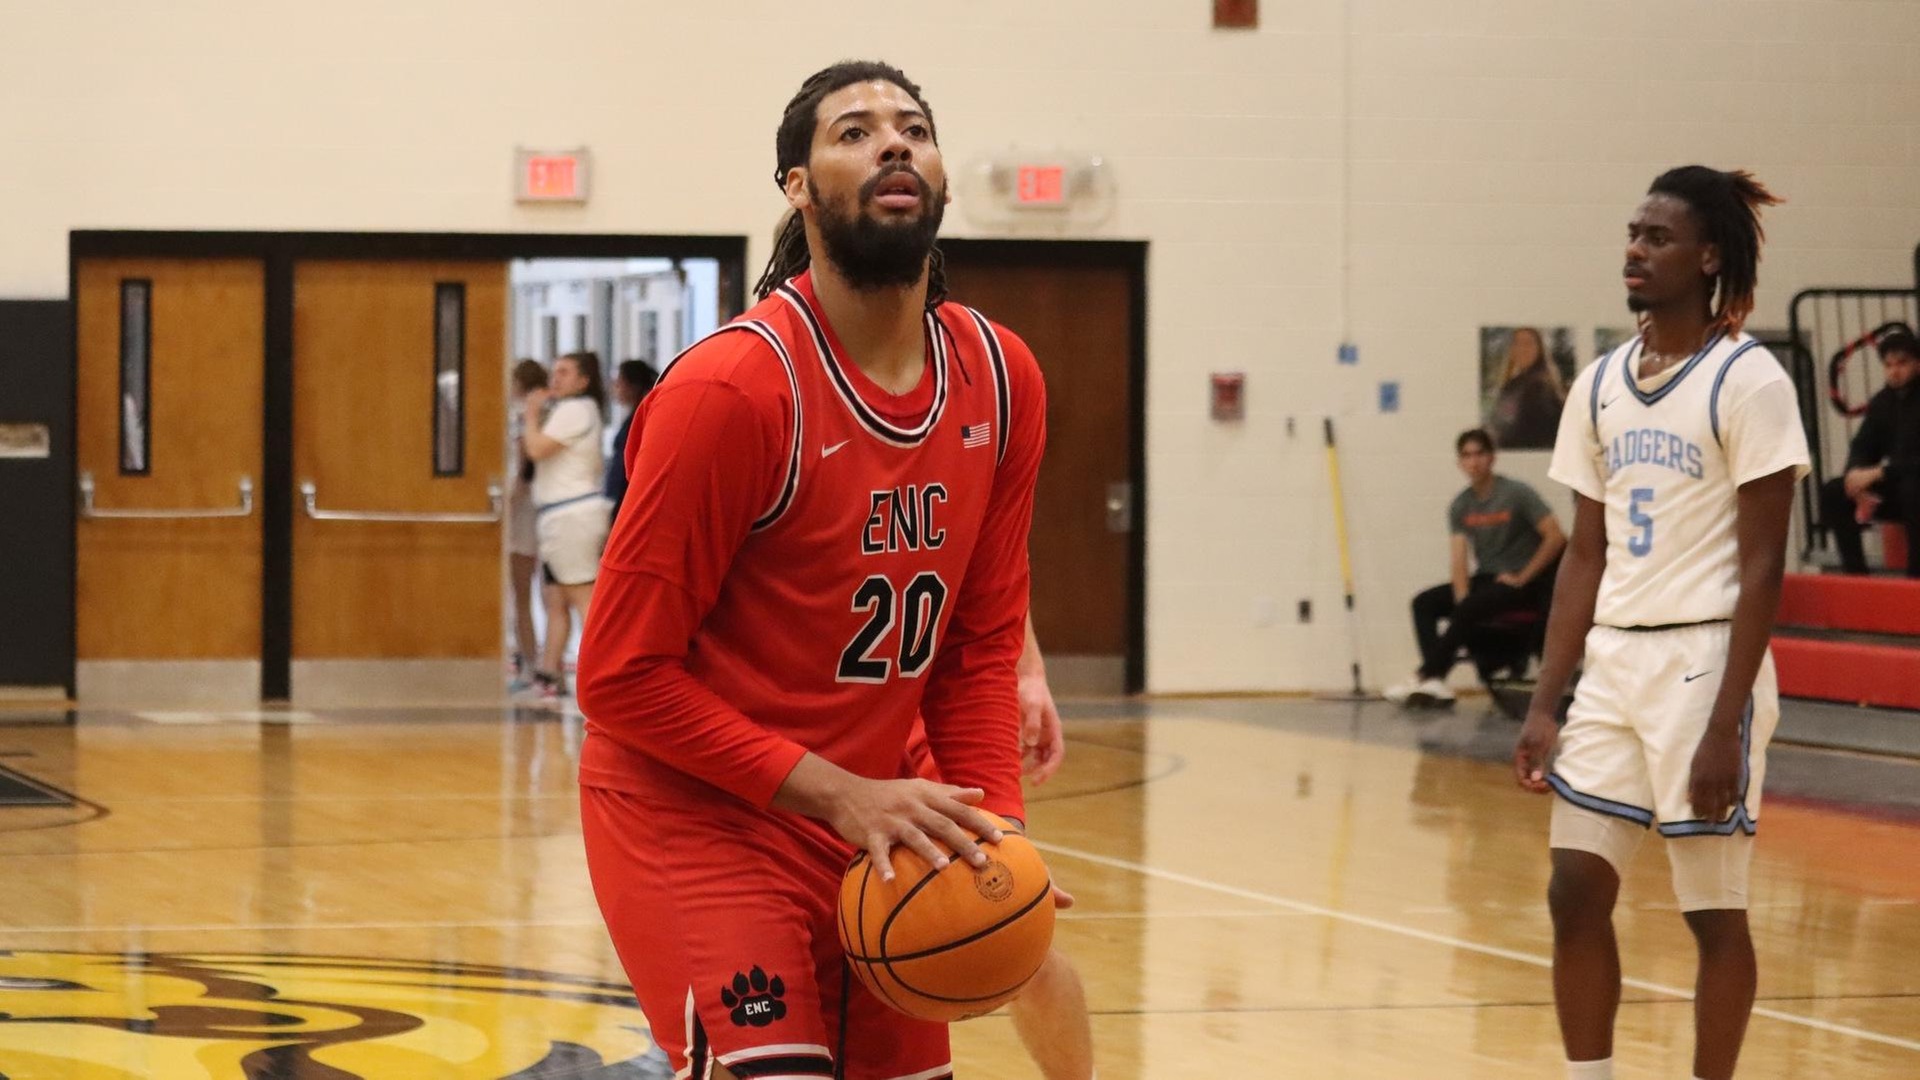 Men’s Hoops Finishes Campaign with 73-65 Loss at SUNY Cobleskill